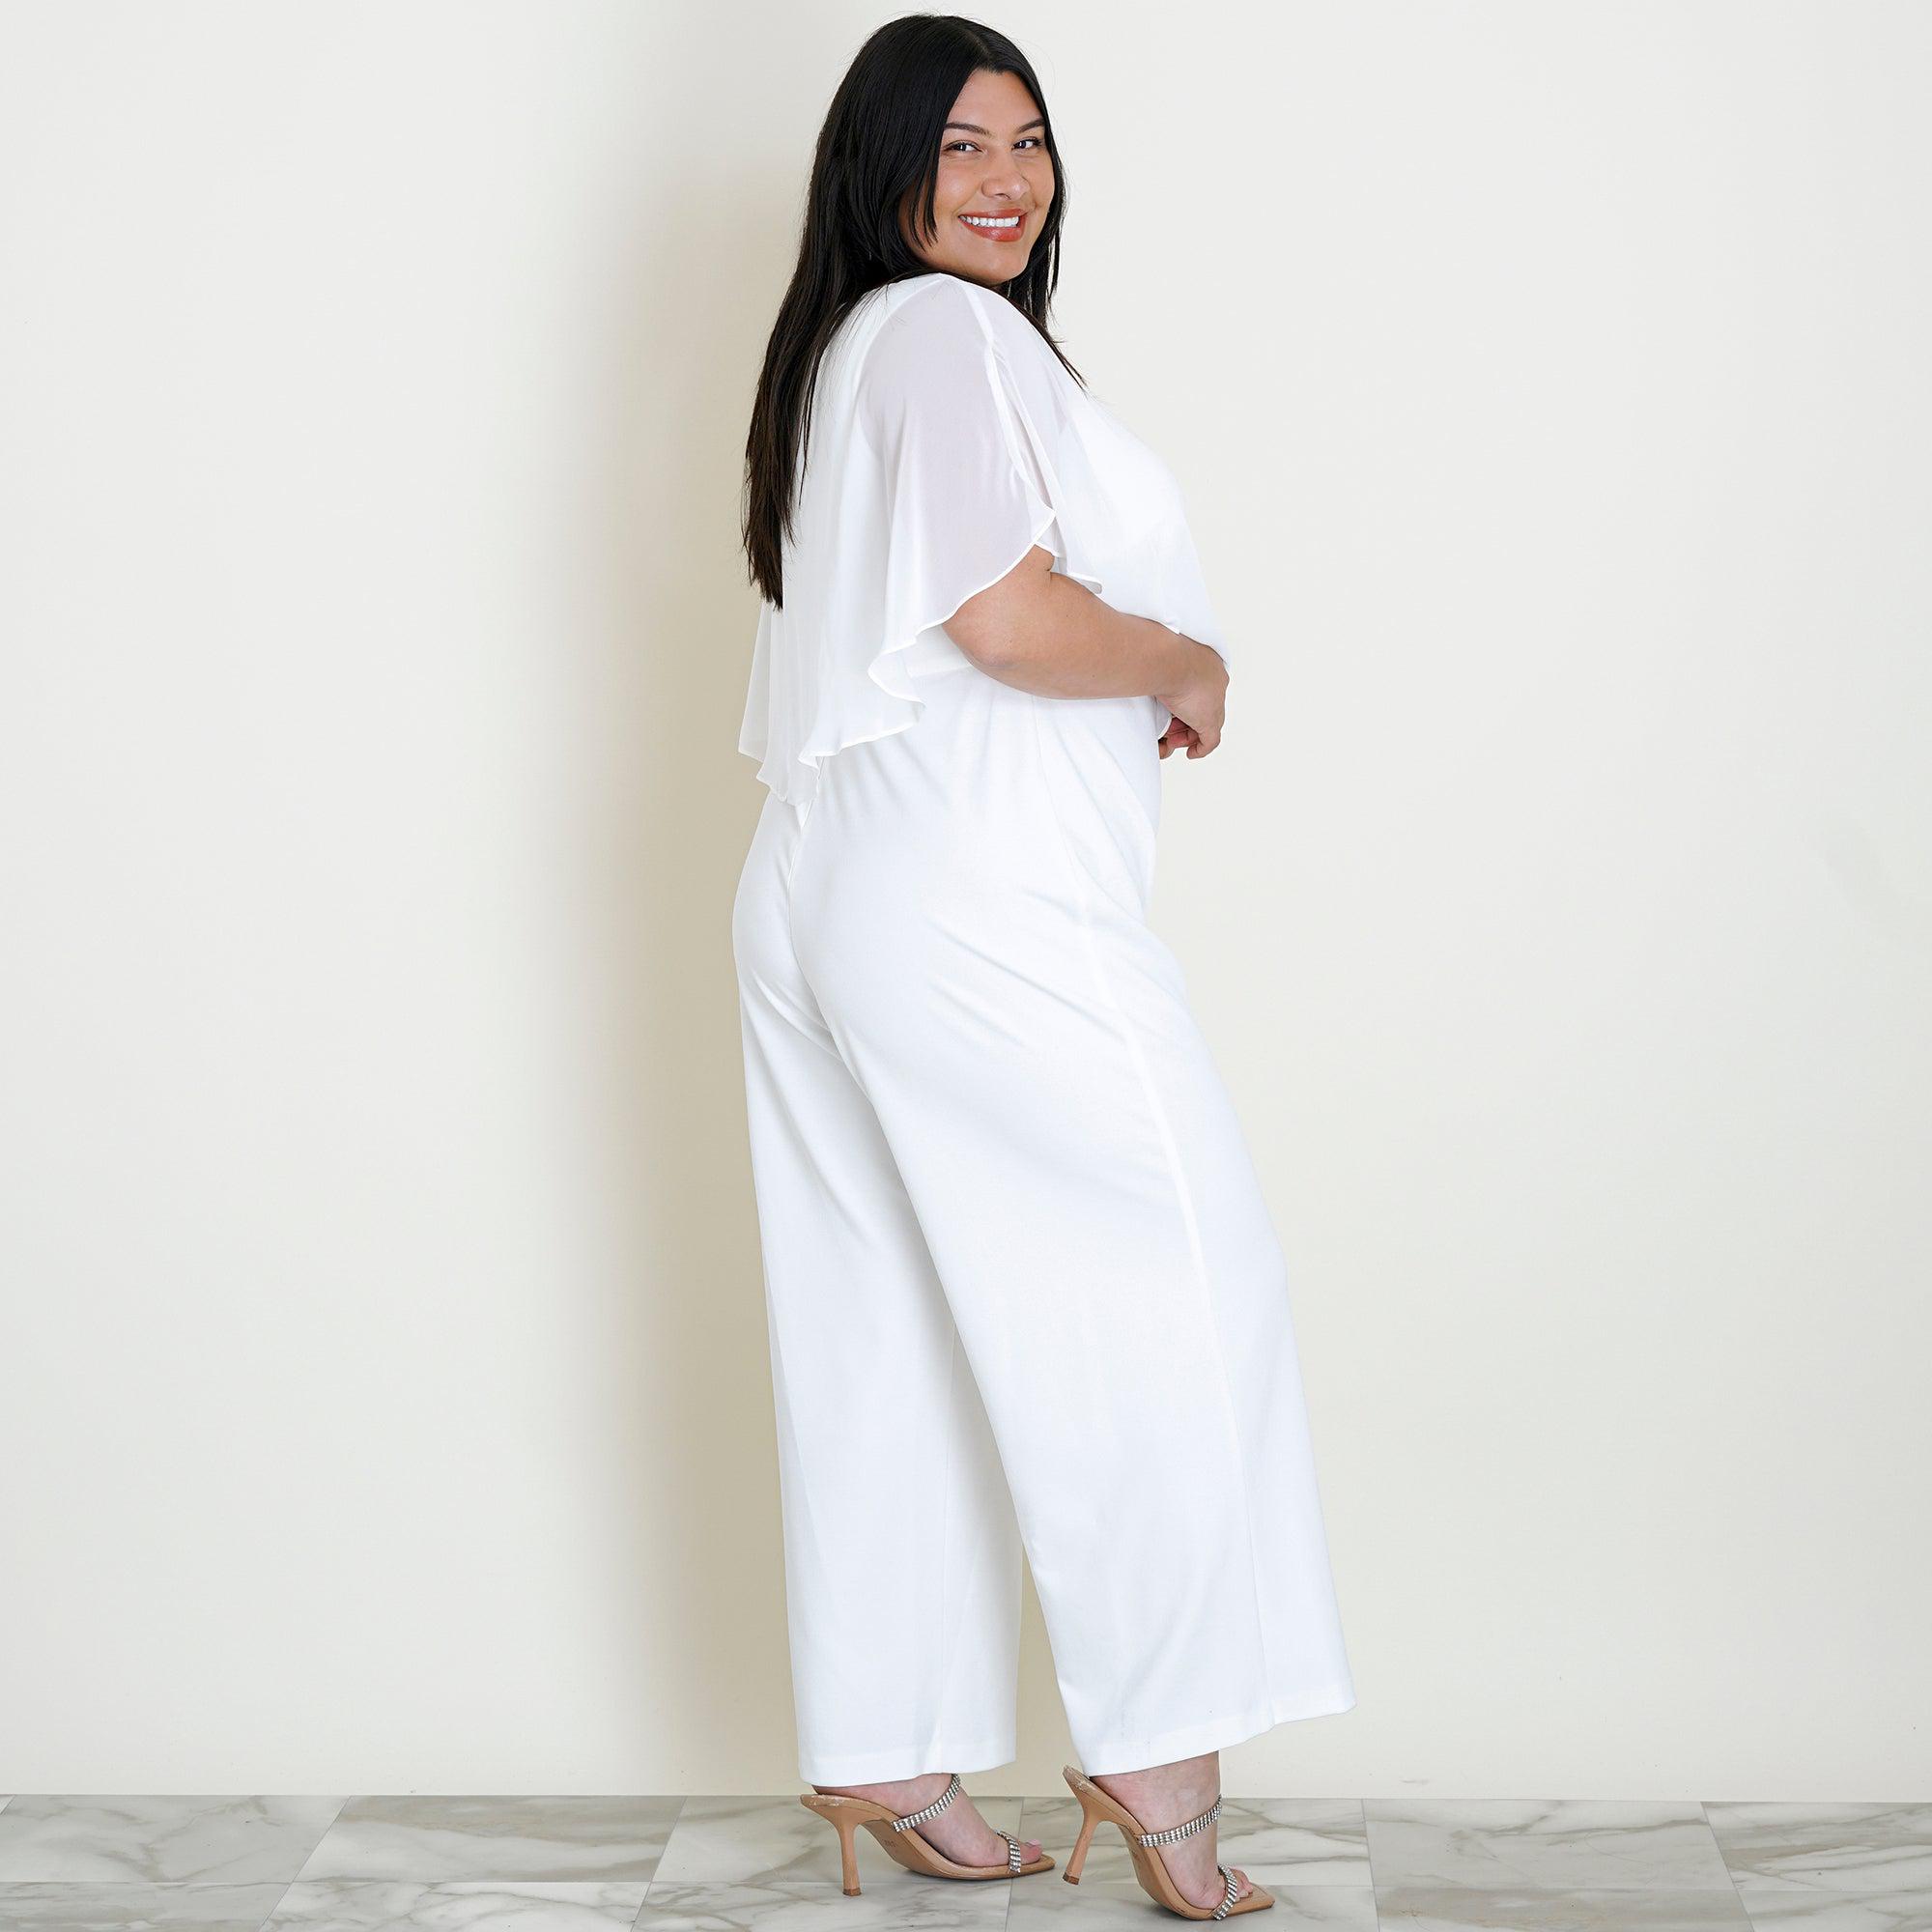 Woman posing wearing Ivory Sunny 2.0 Chiffon Capelet Ivory Jumpsuit from Connected Apparel